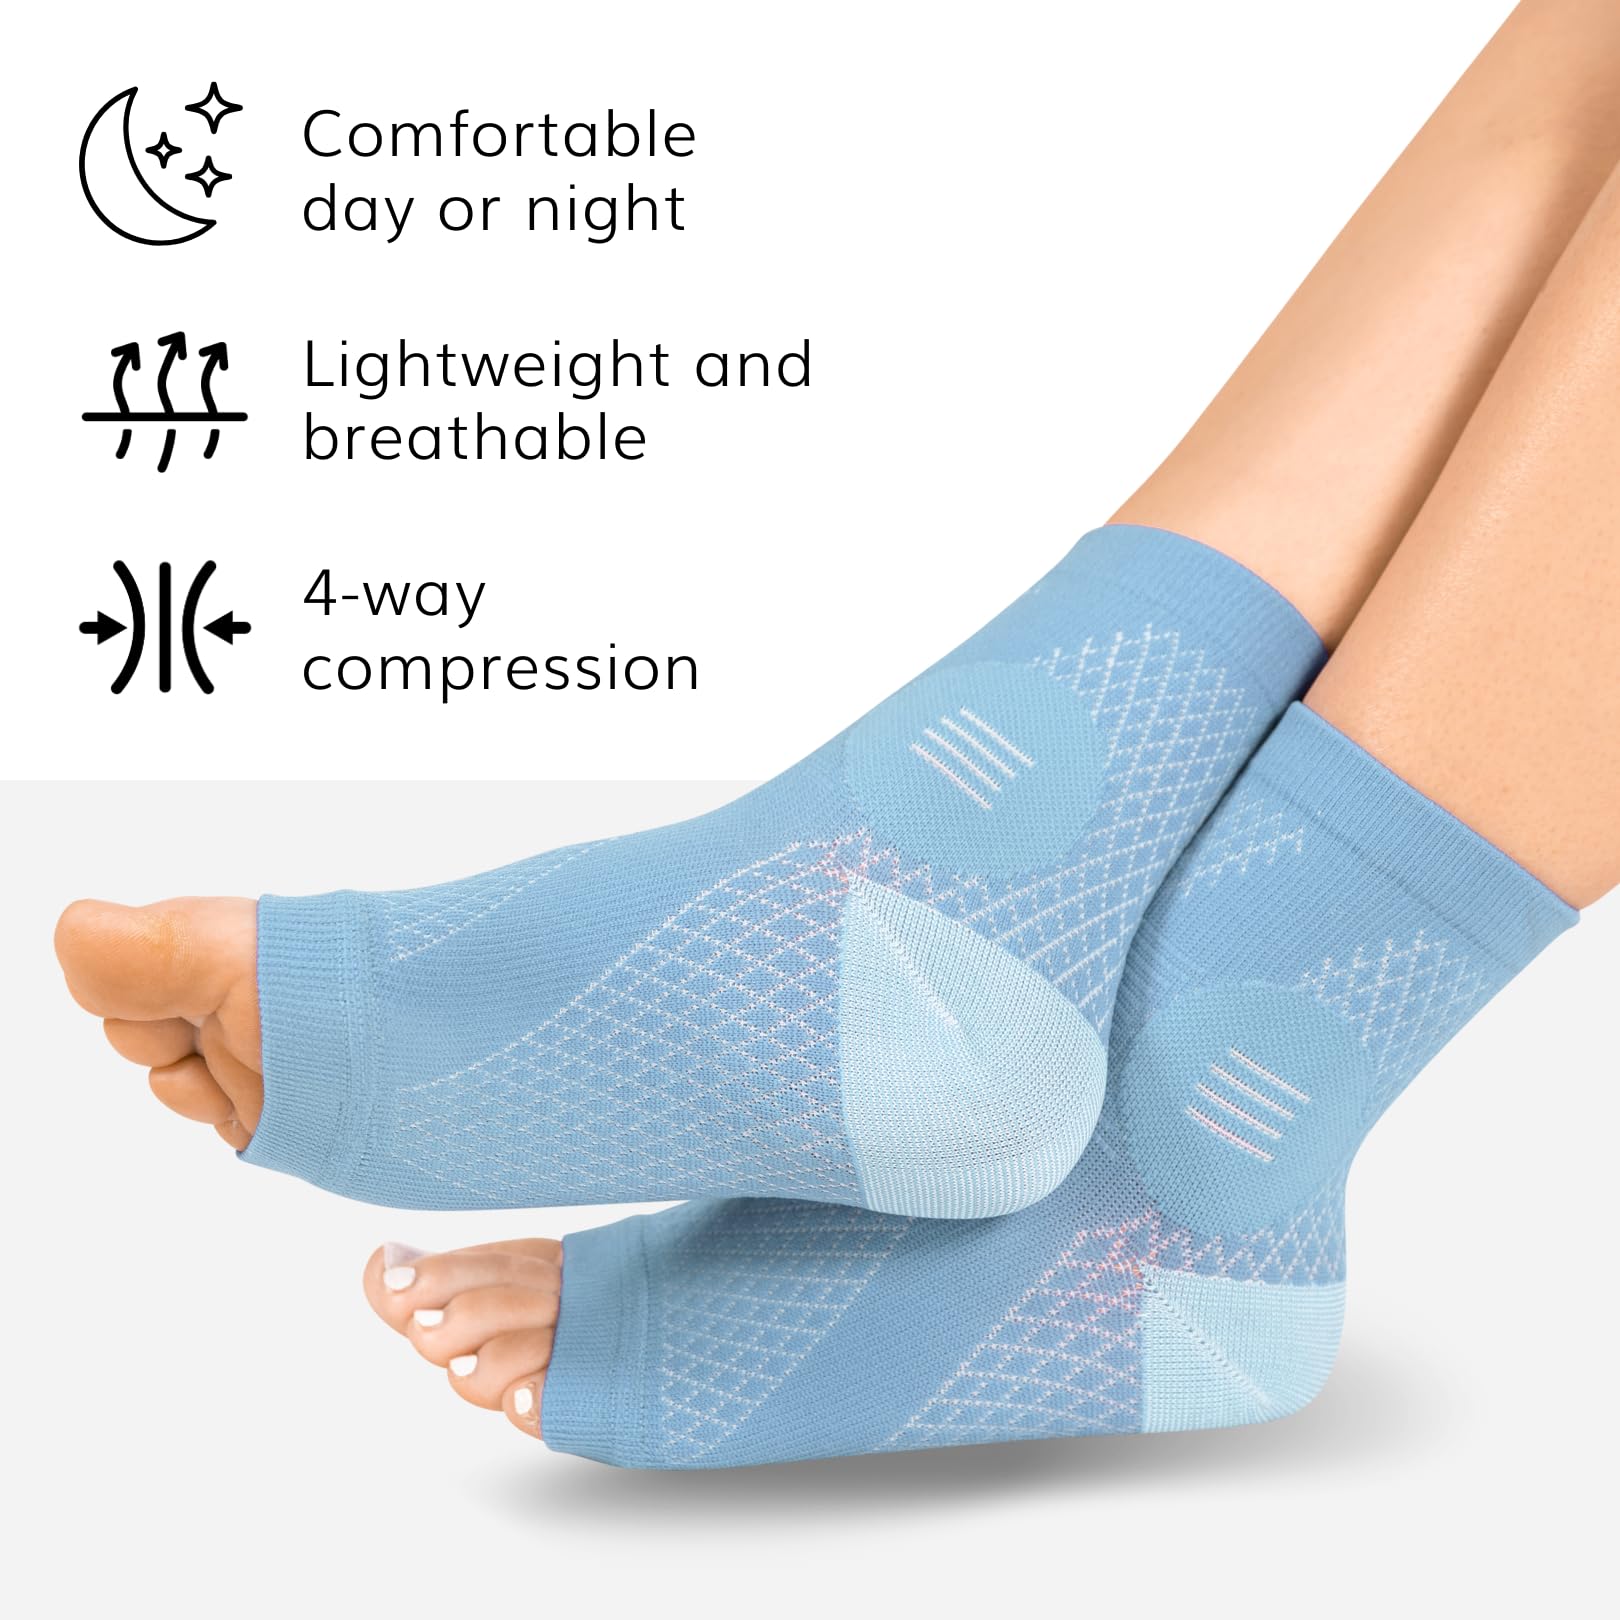 BraceAbility Neuropathy Socks - Peripheral Neuritis Compression Diabetic Toeless Foot Sleeves for Nerve Damage in Feet, Ankle Gout, Plantar Fasciitis Relief for Men and Women (XL - Light Blue)